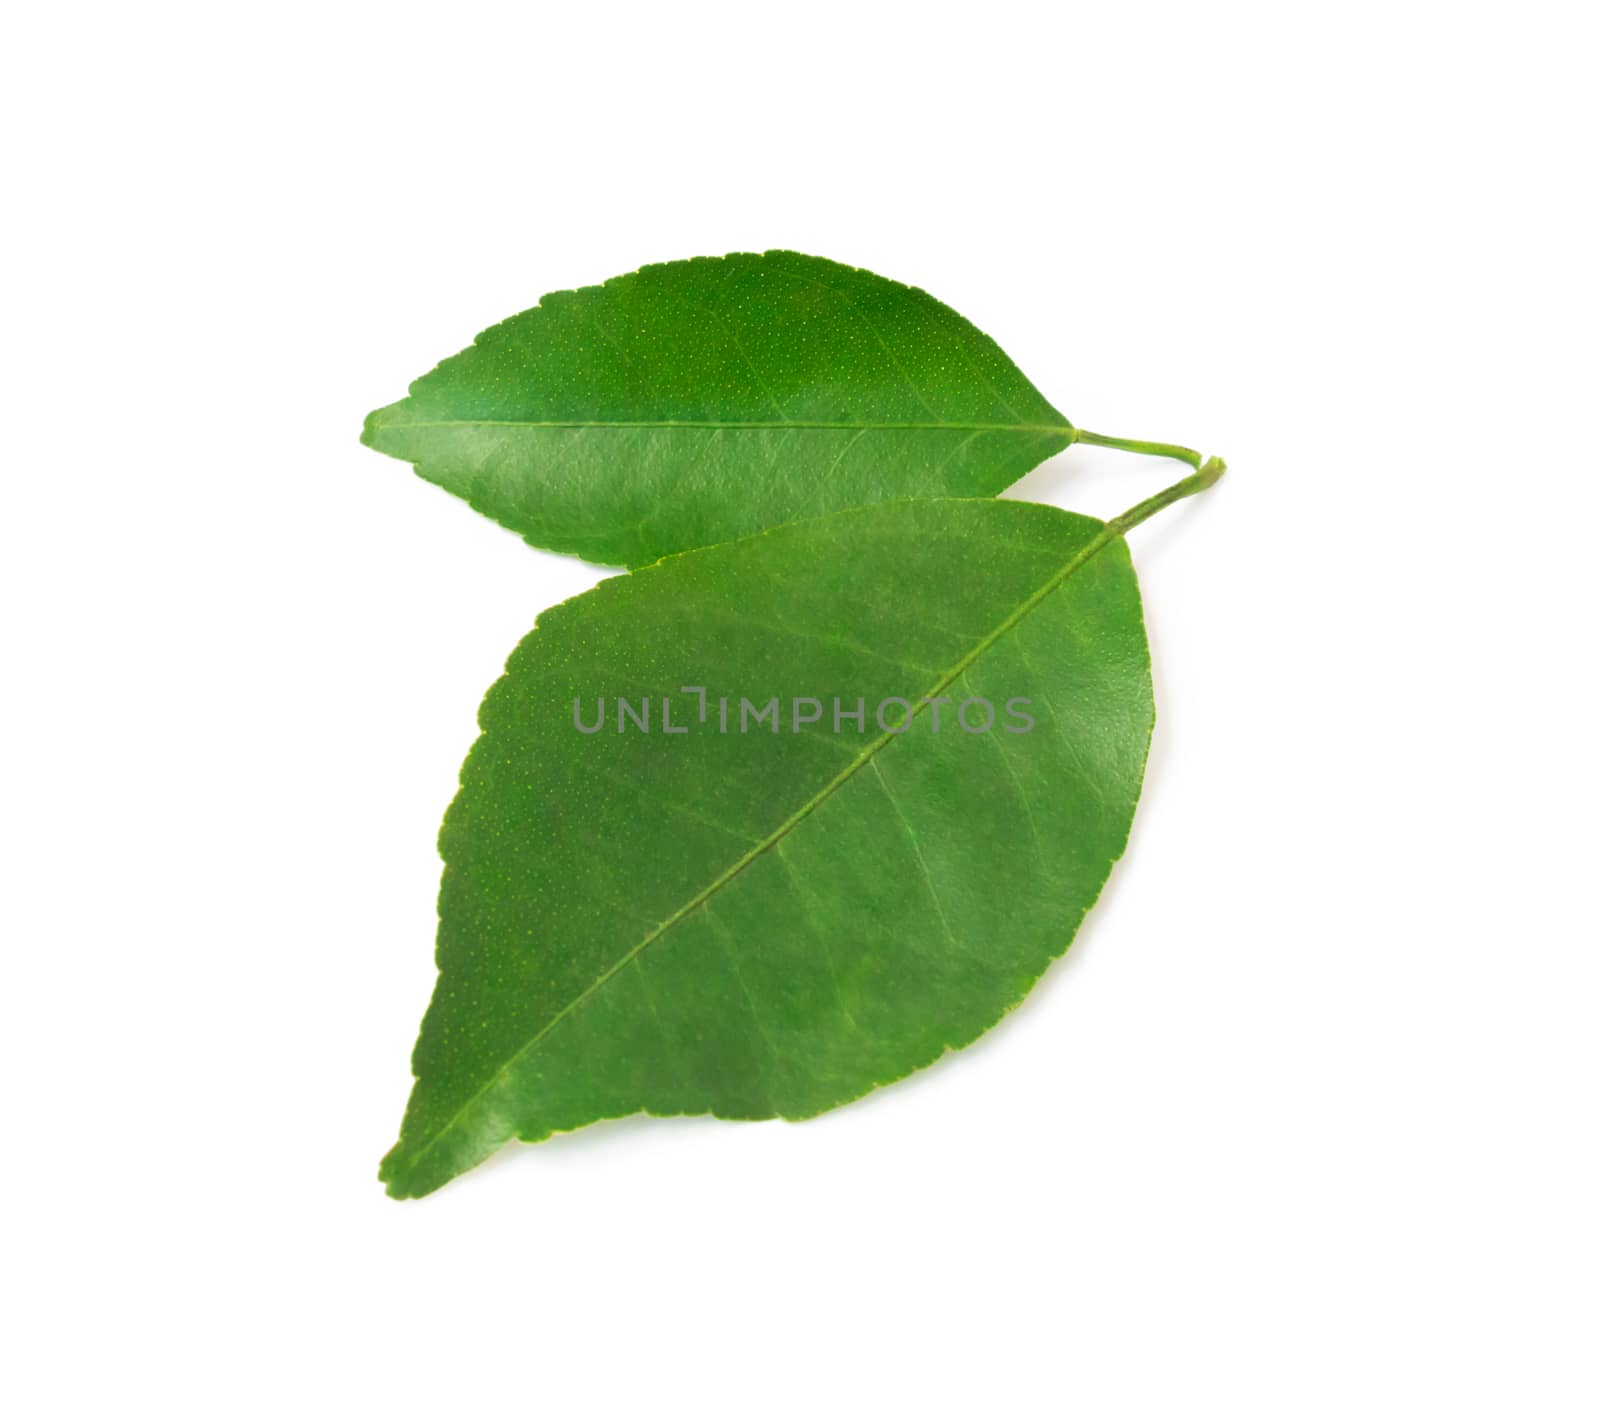 Lemon leaf isolated on white background with clipping path by pt.pongsak@gmail.com